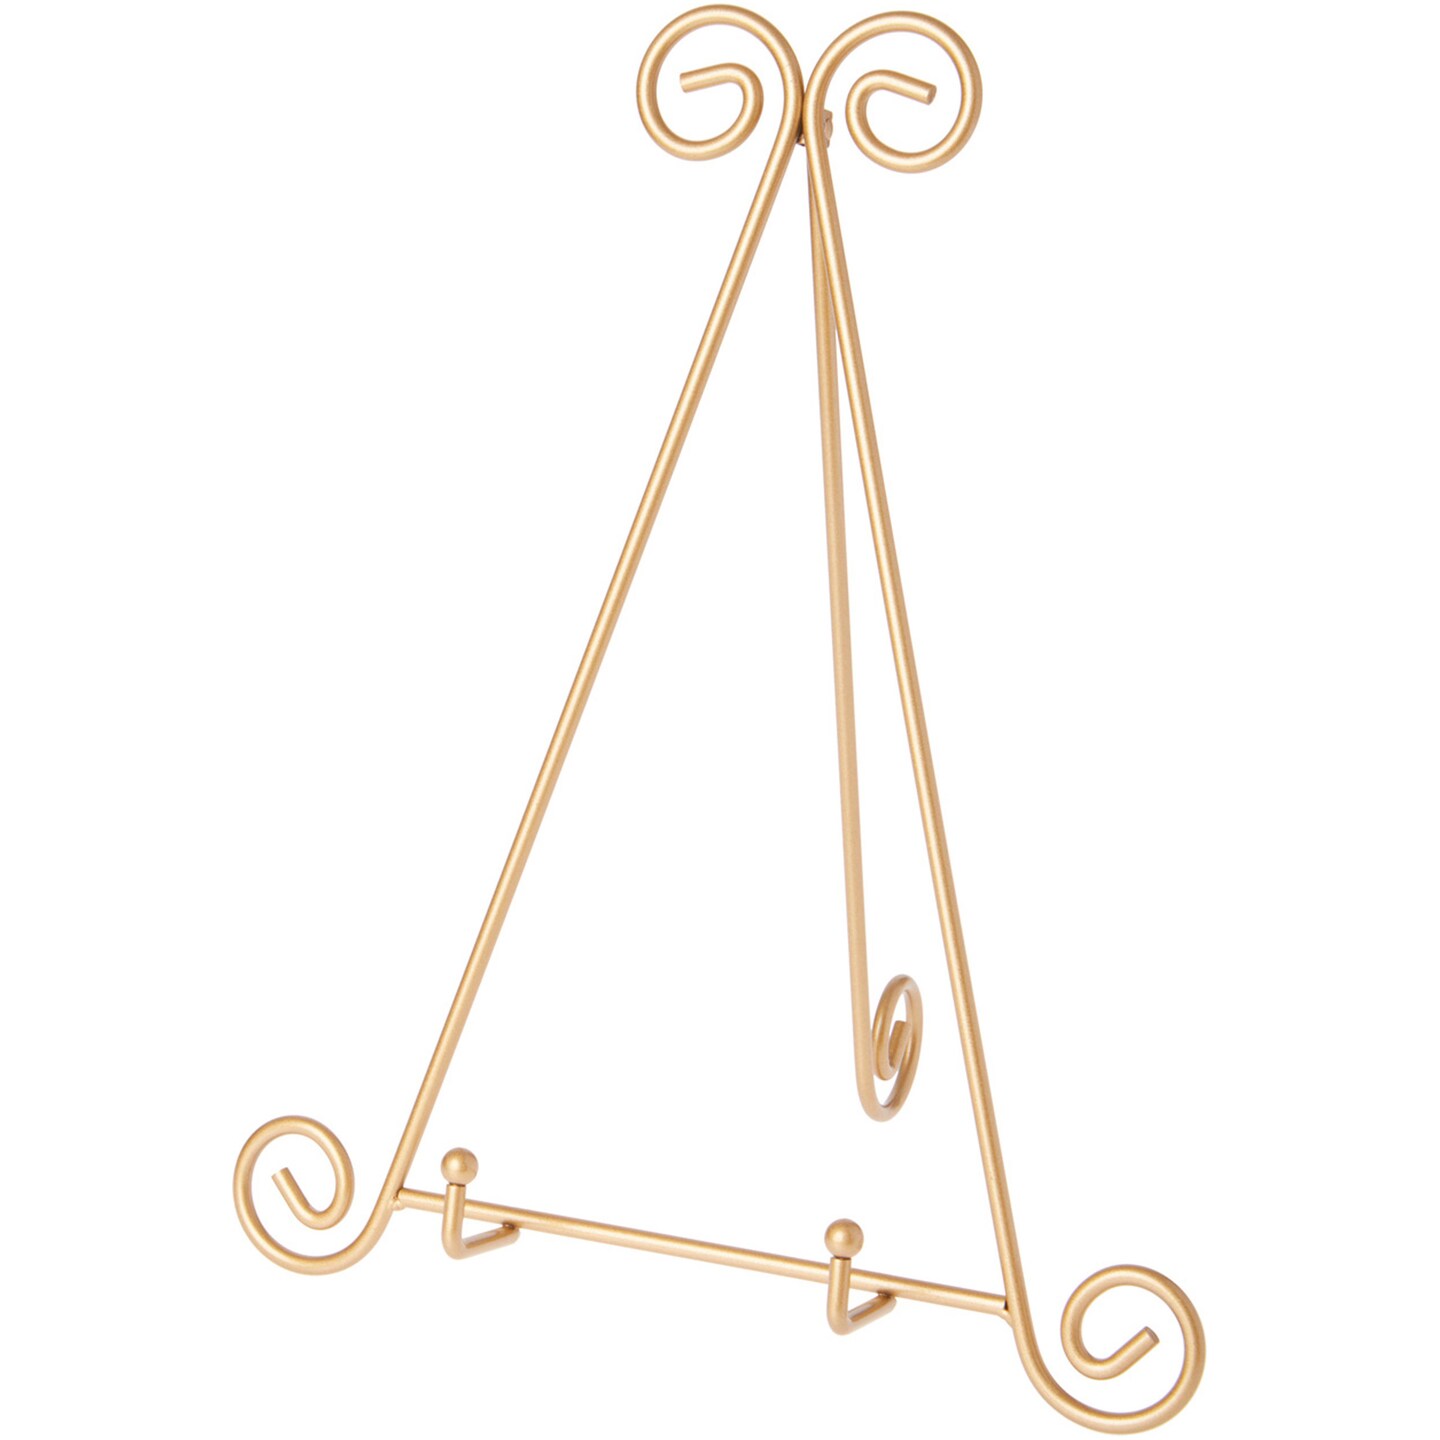 Bard&#x27;s Gold-toned Metal Easel, 15&#x22; H x 12&#x22; W x 10&#x22; D (For 1.25&#x22; Deep Plates)